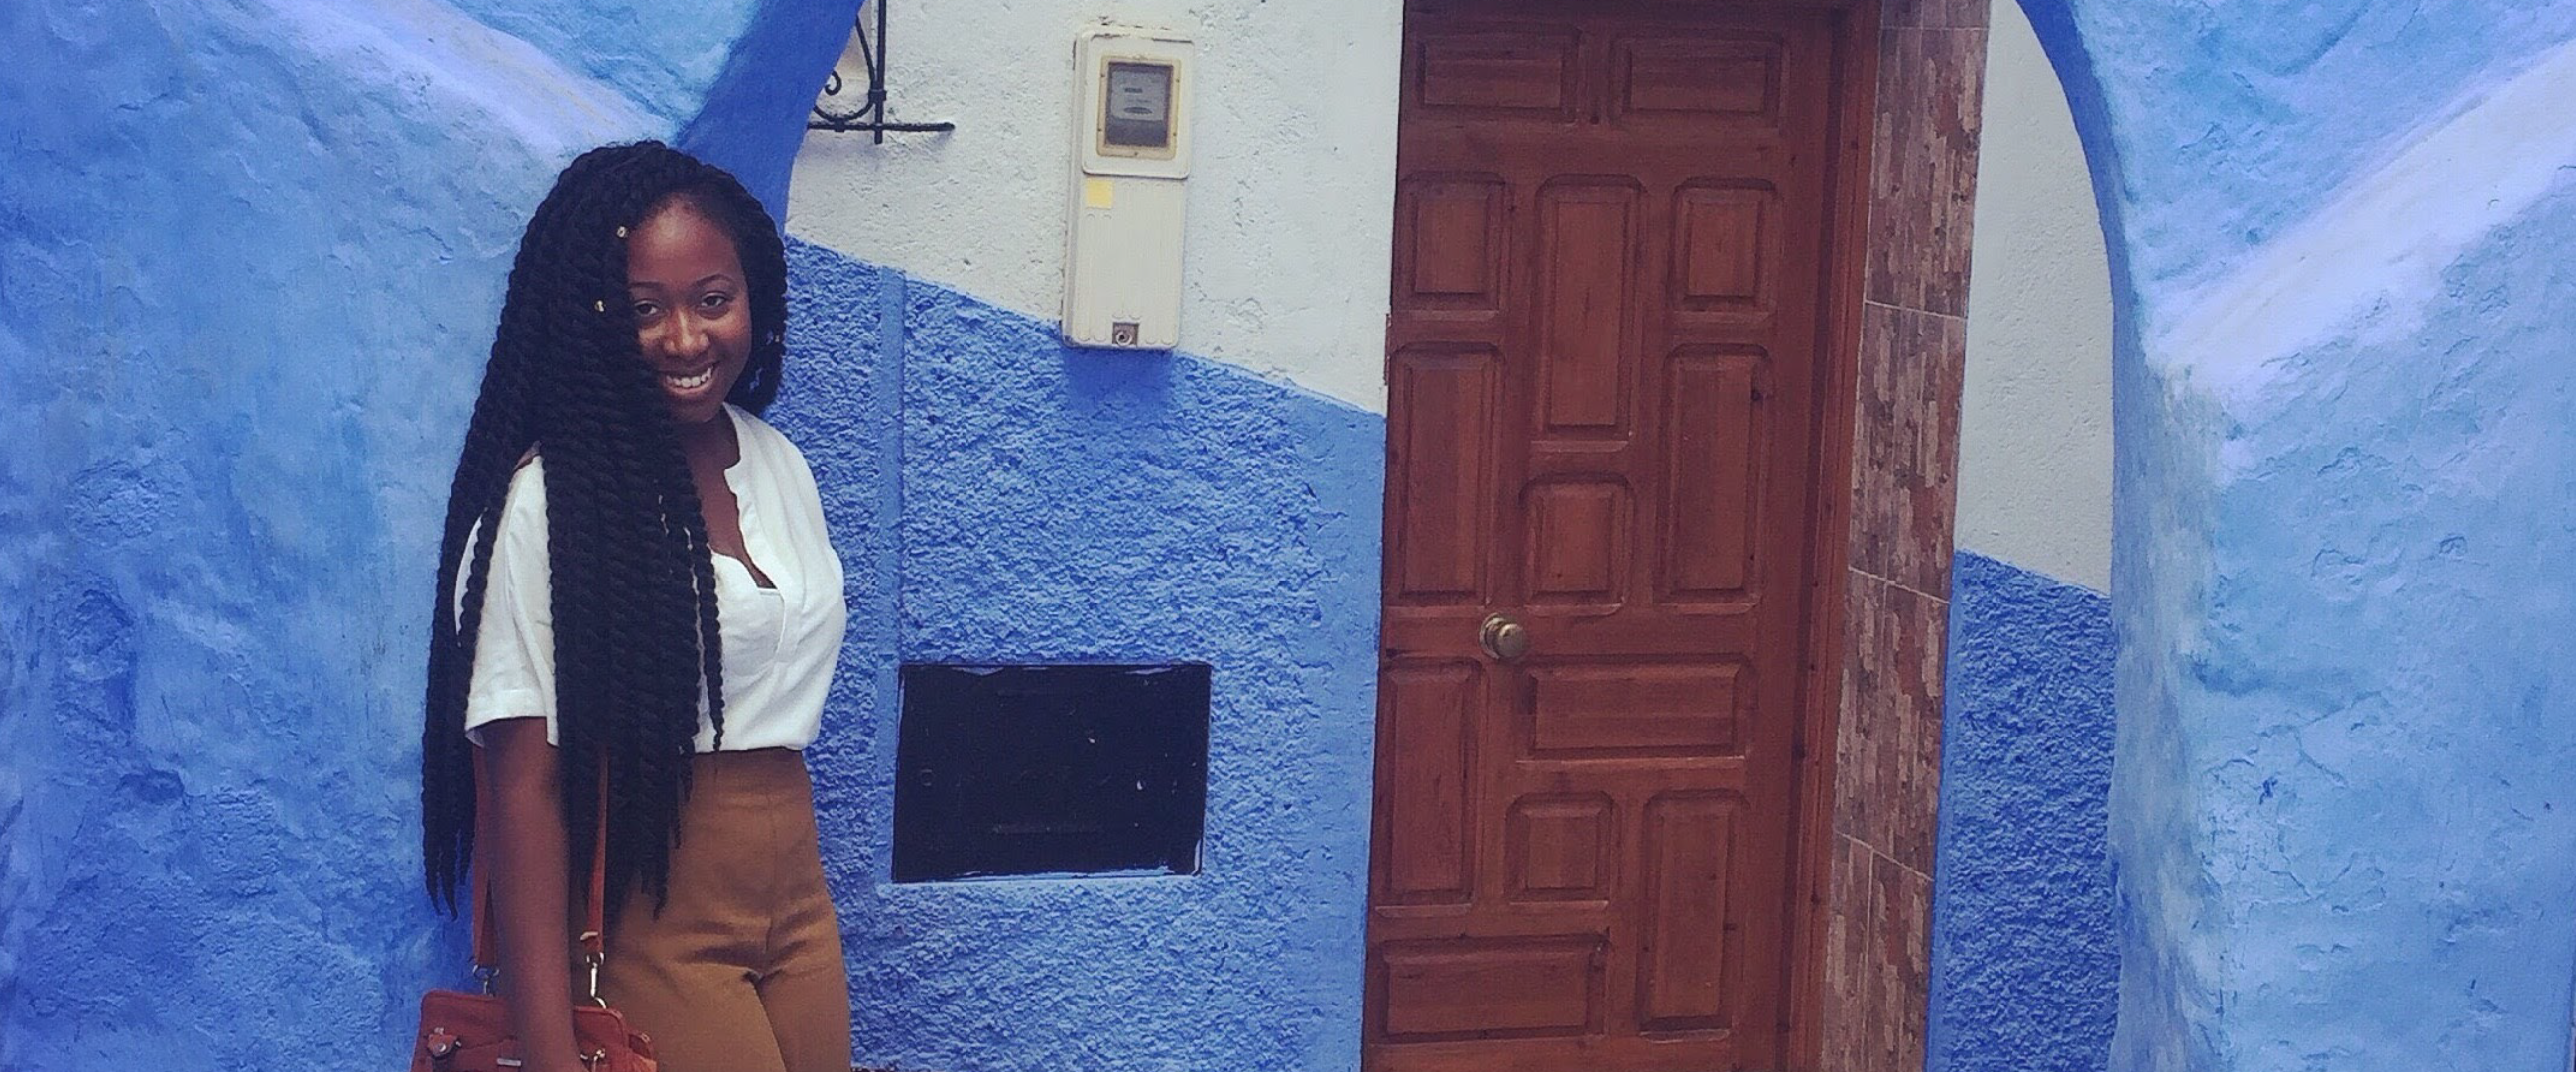 Ermida, while studying abroad in Morocco, stands against a blue wall